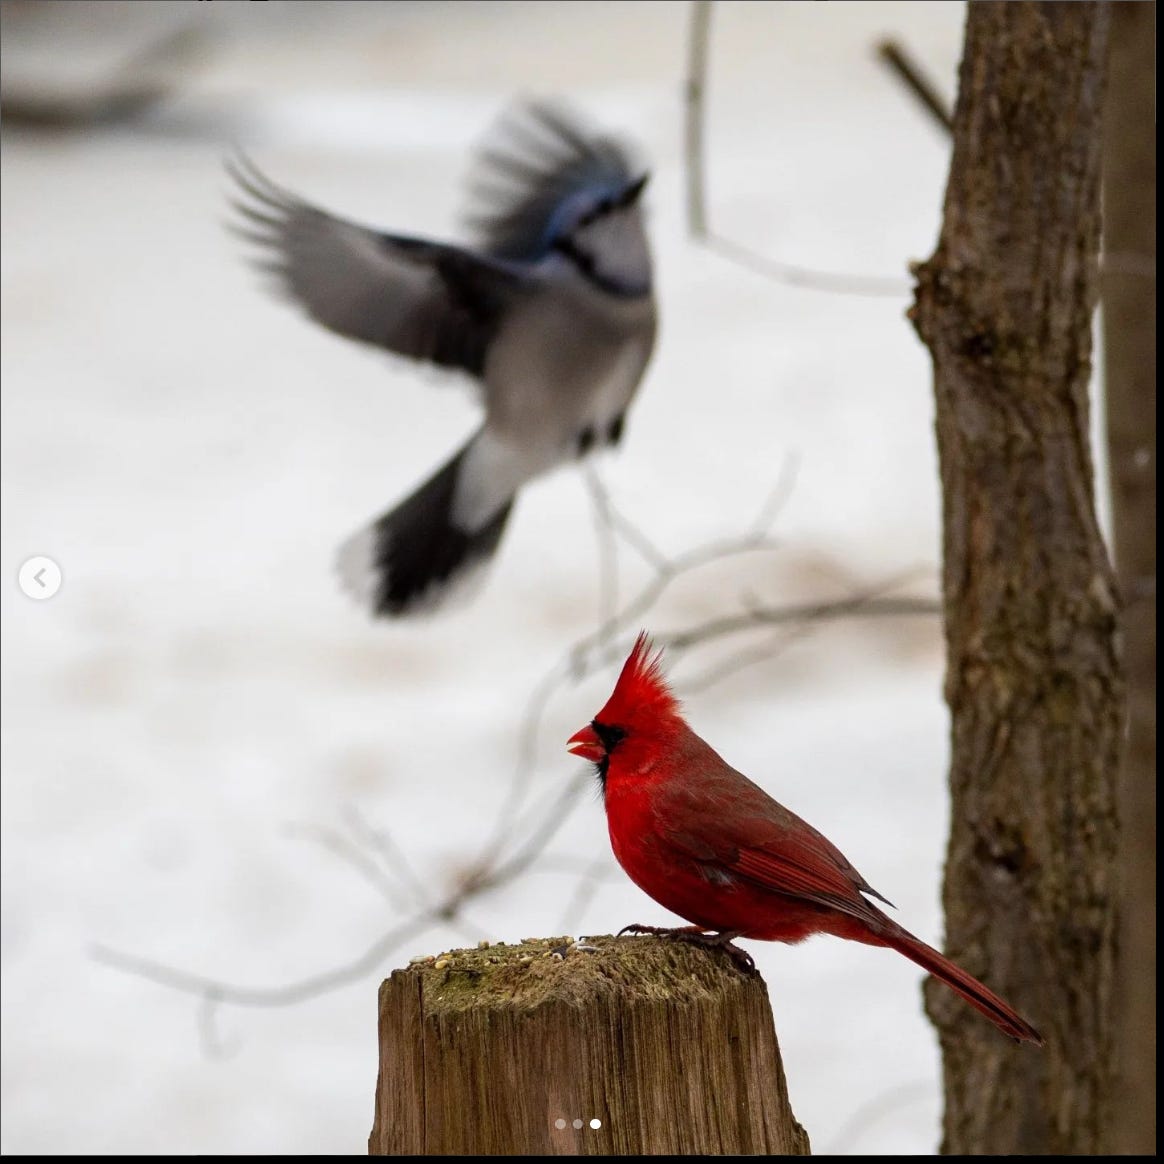 A red male northern cardinal perches in profile while a blue jay swoops in, blurred in the background